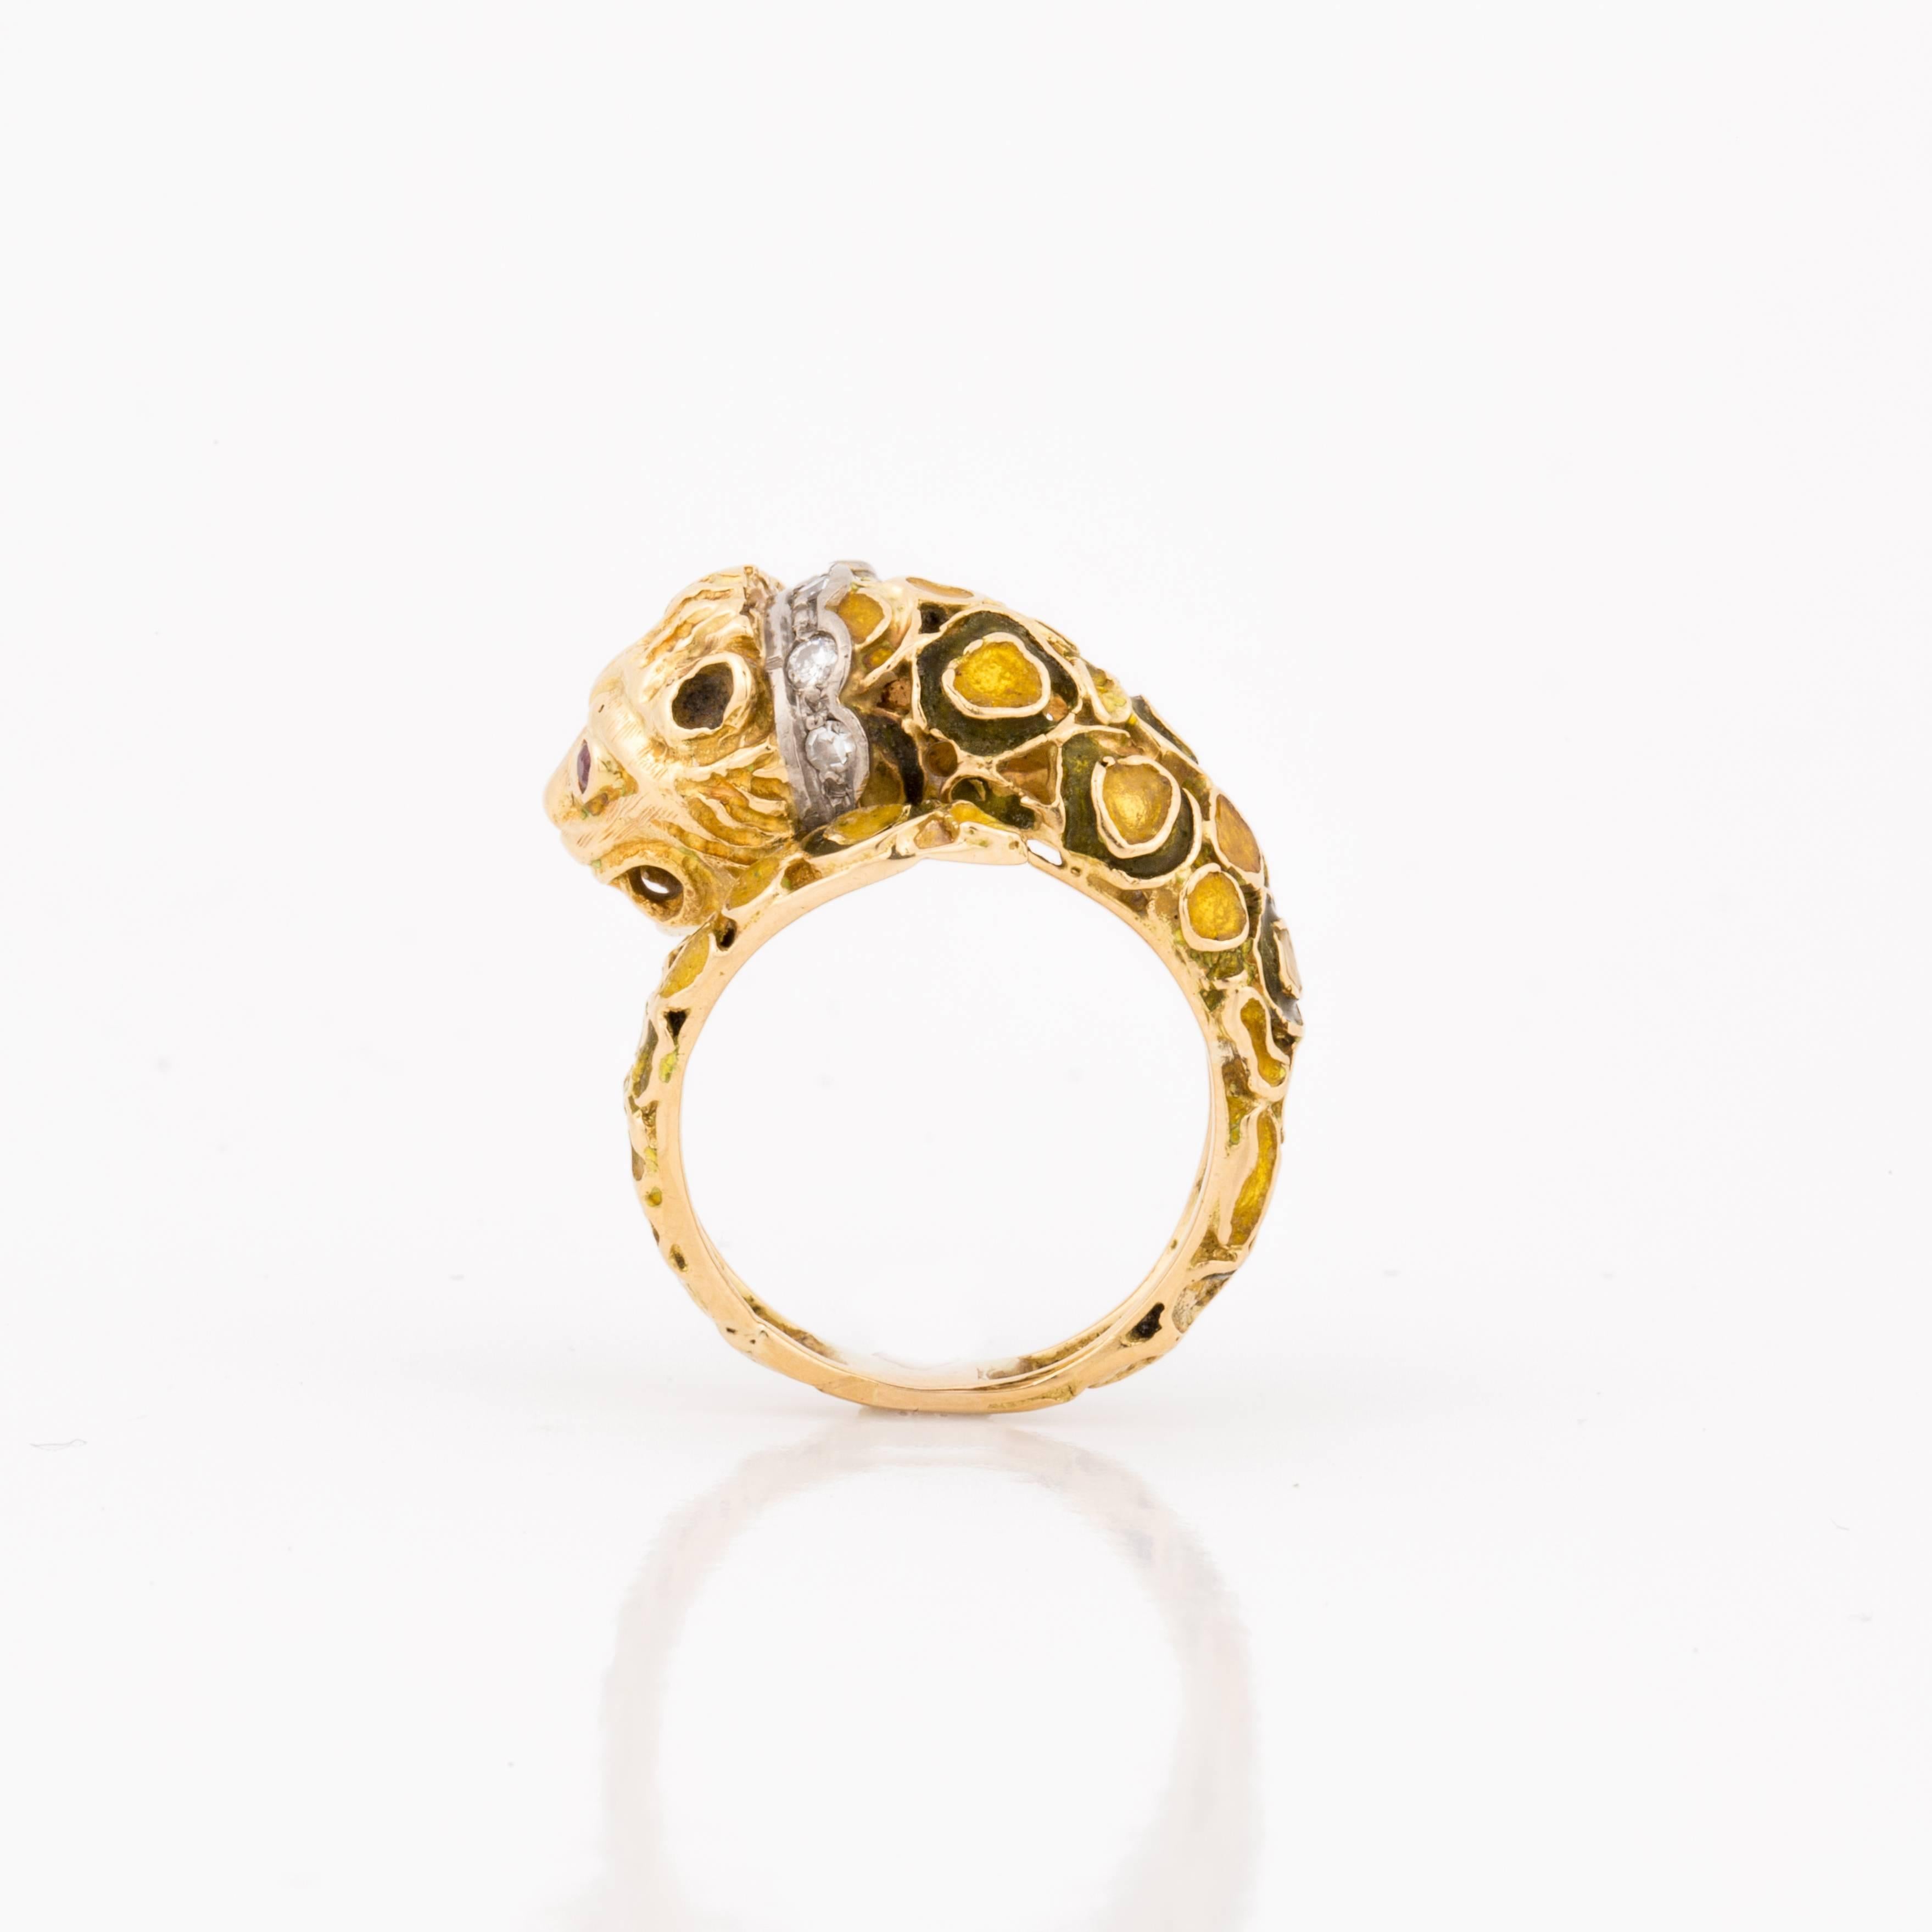 Lalaounis lion head ring in 18K yellow gold with enamel, rubies and diamonds, marked 